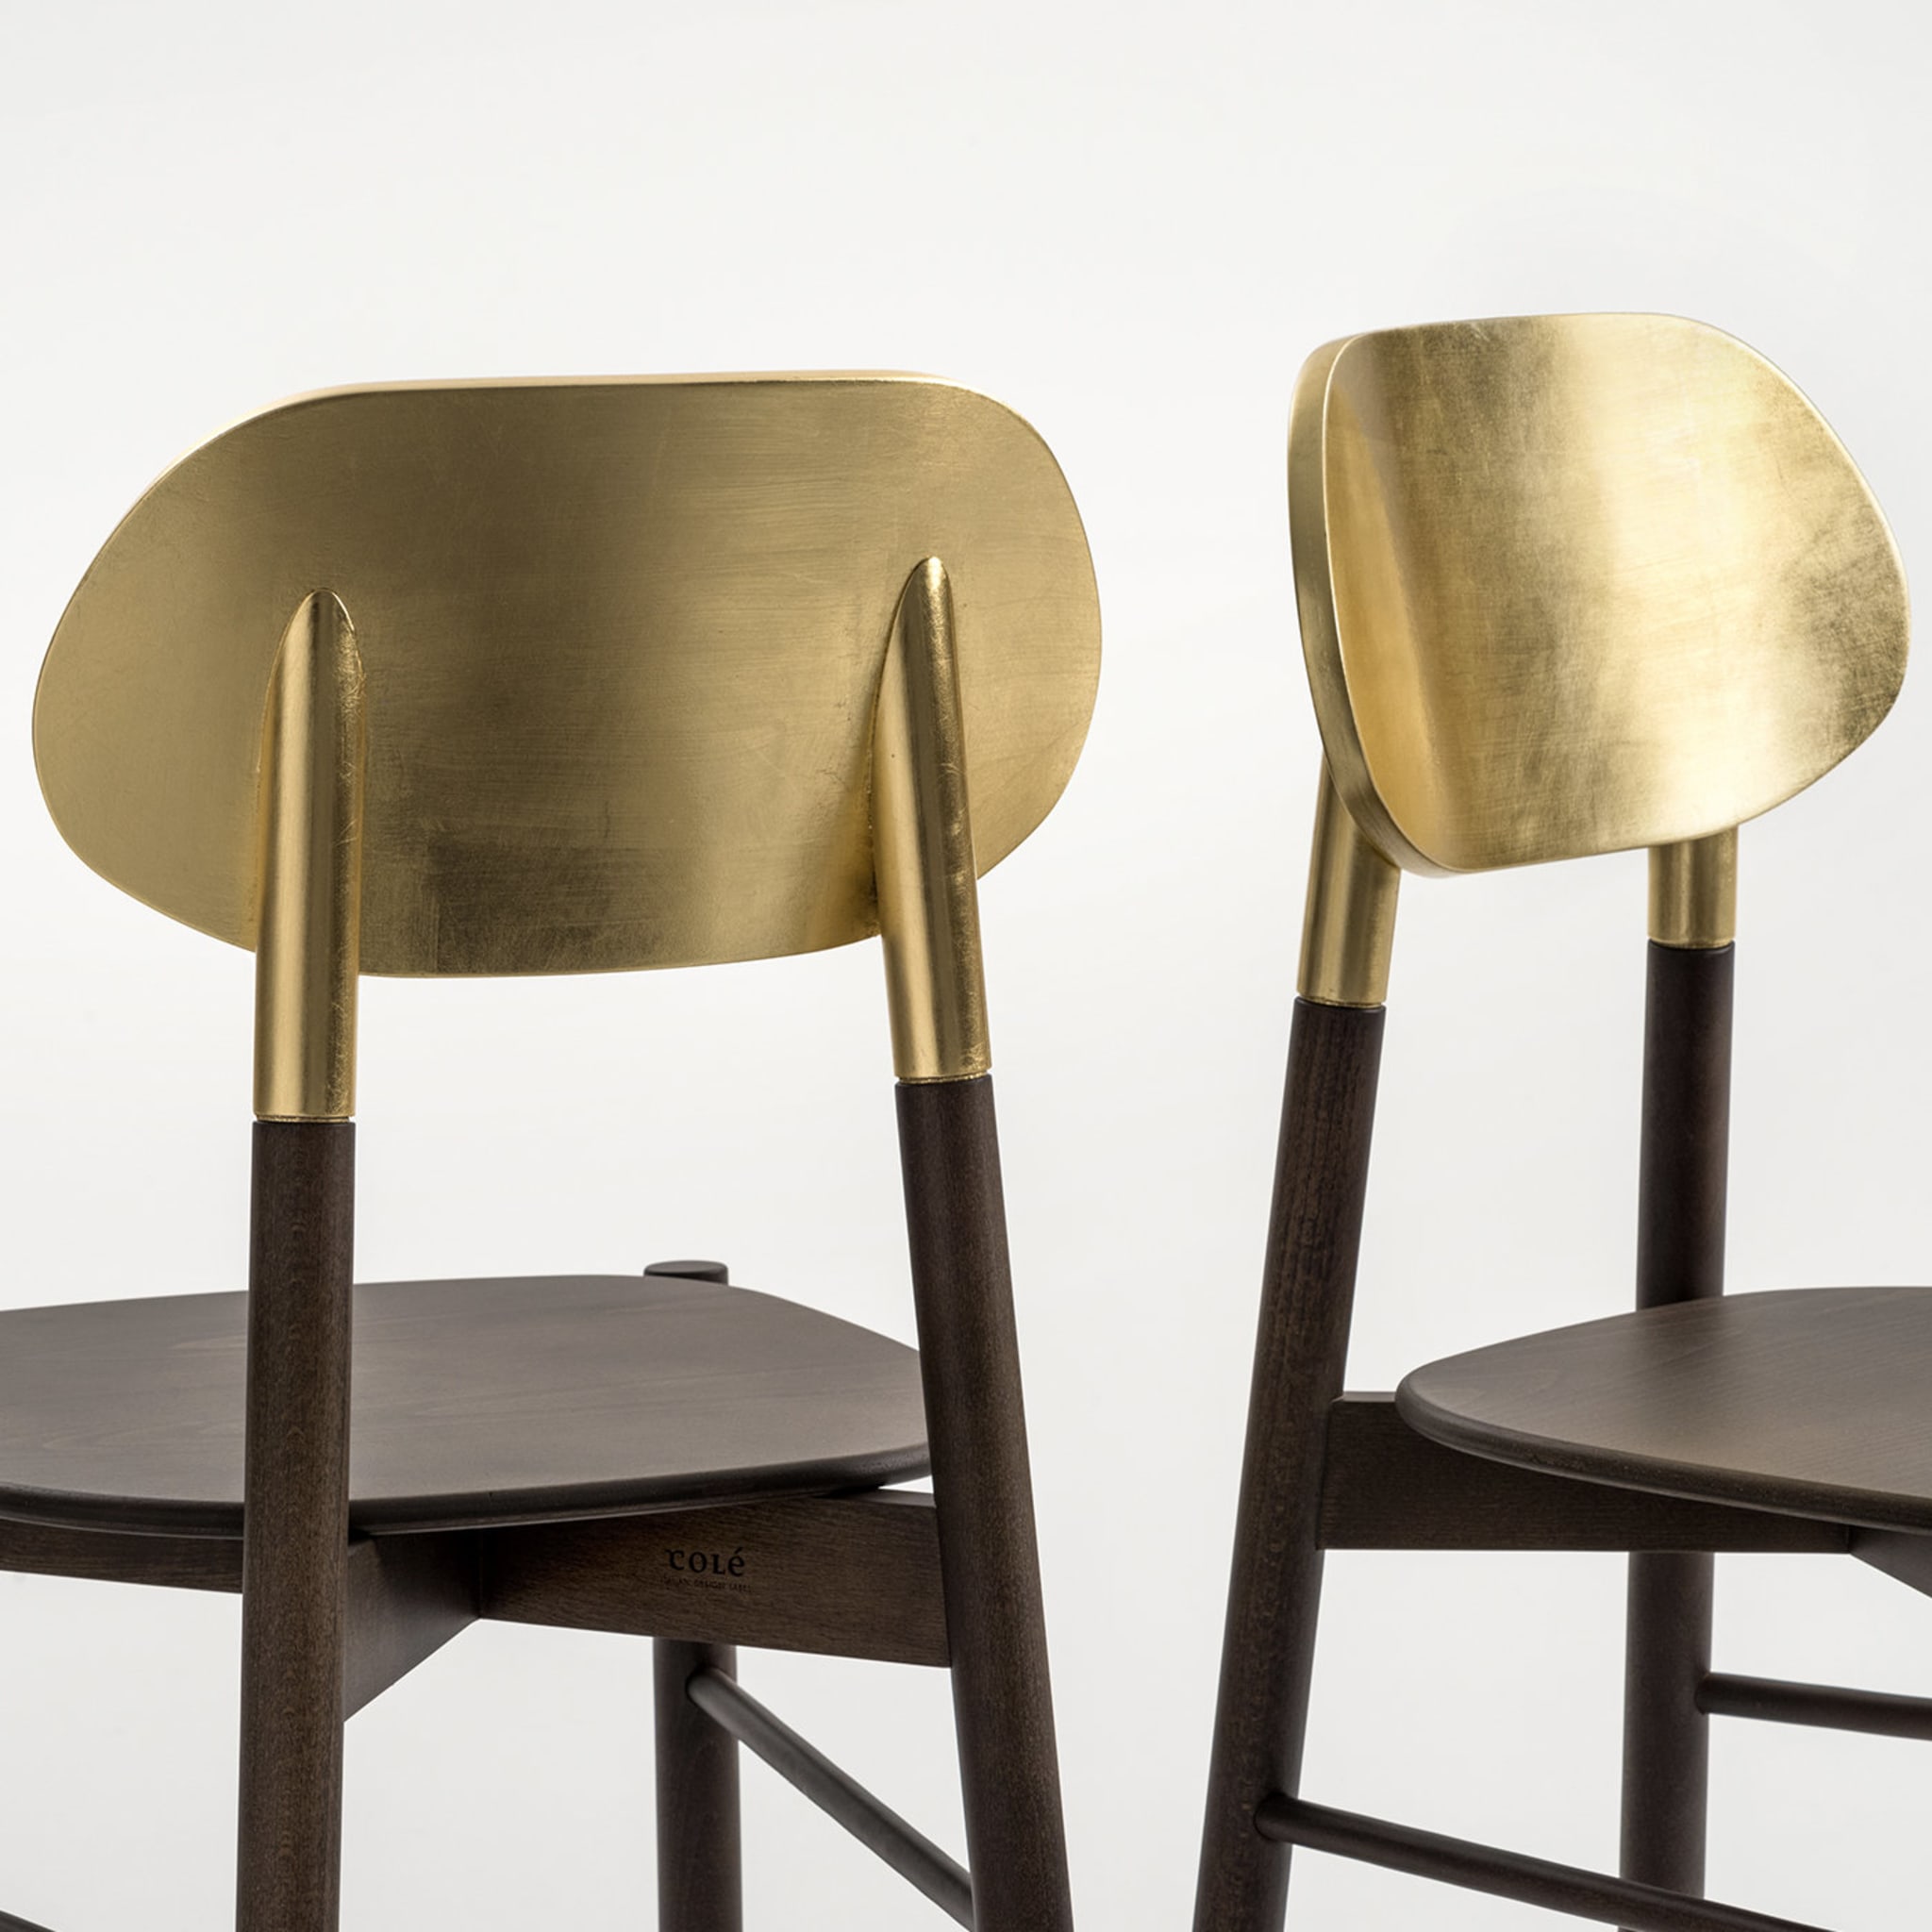 Bokken Chair with Gold Leaf - Alternative view 2